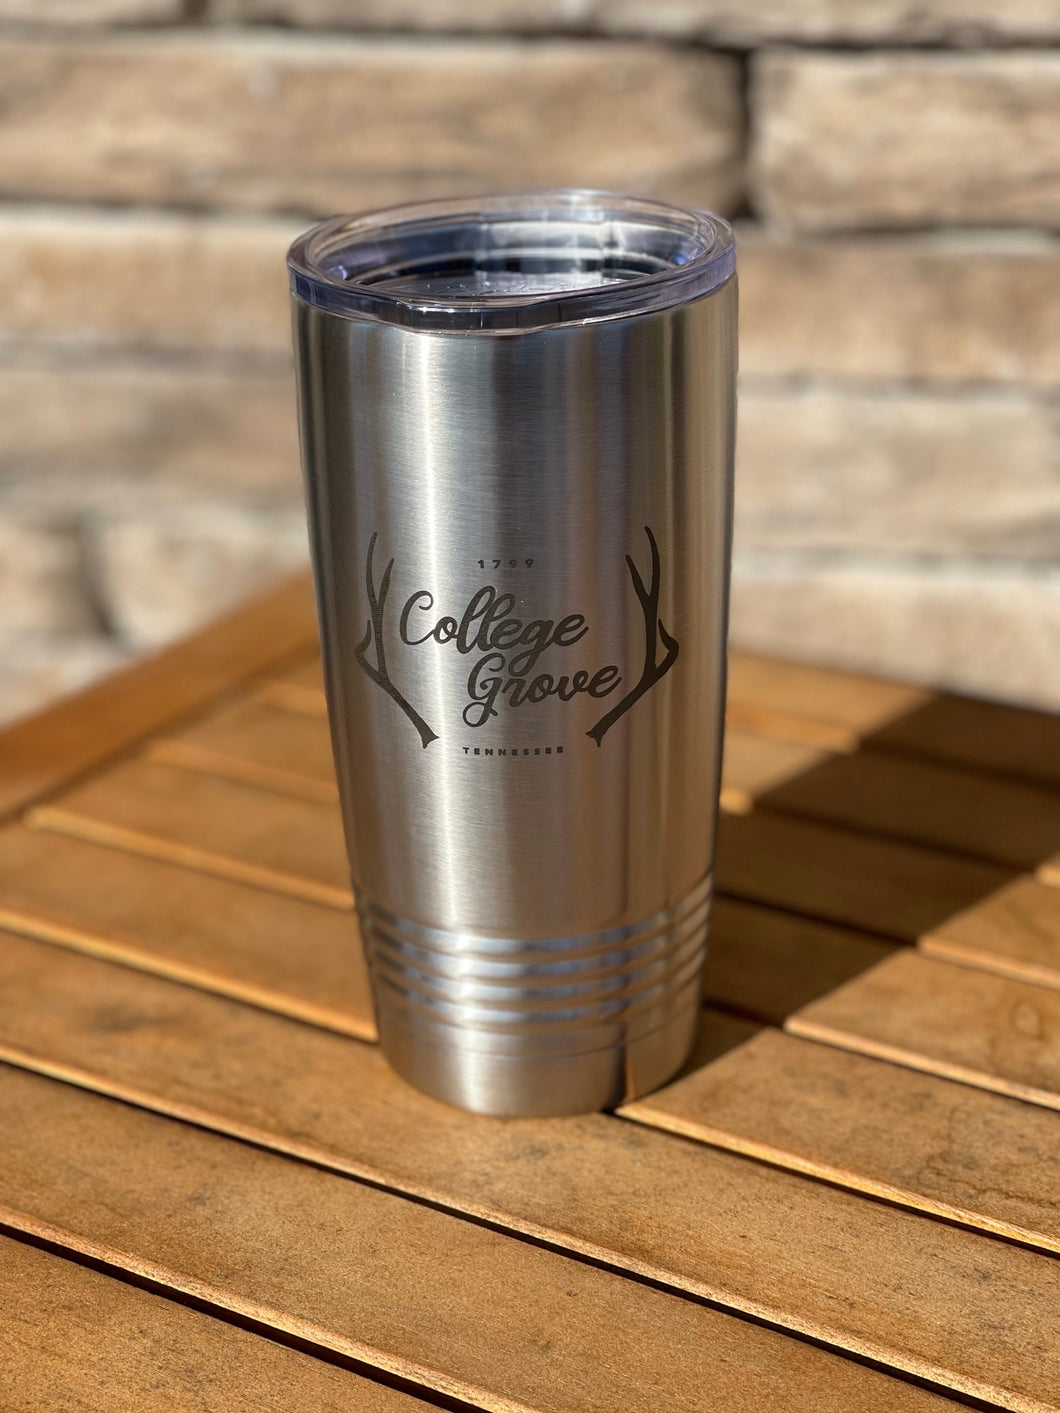 WHOLESALE- min (12) ...20 oz. Stainless Steel Insulated Tumbler w/Lid # 5 Logo College Grove w/antlers